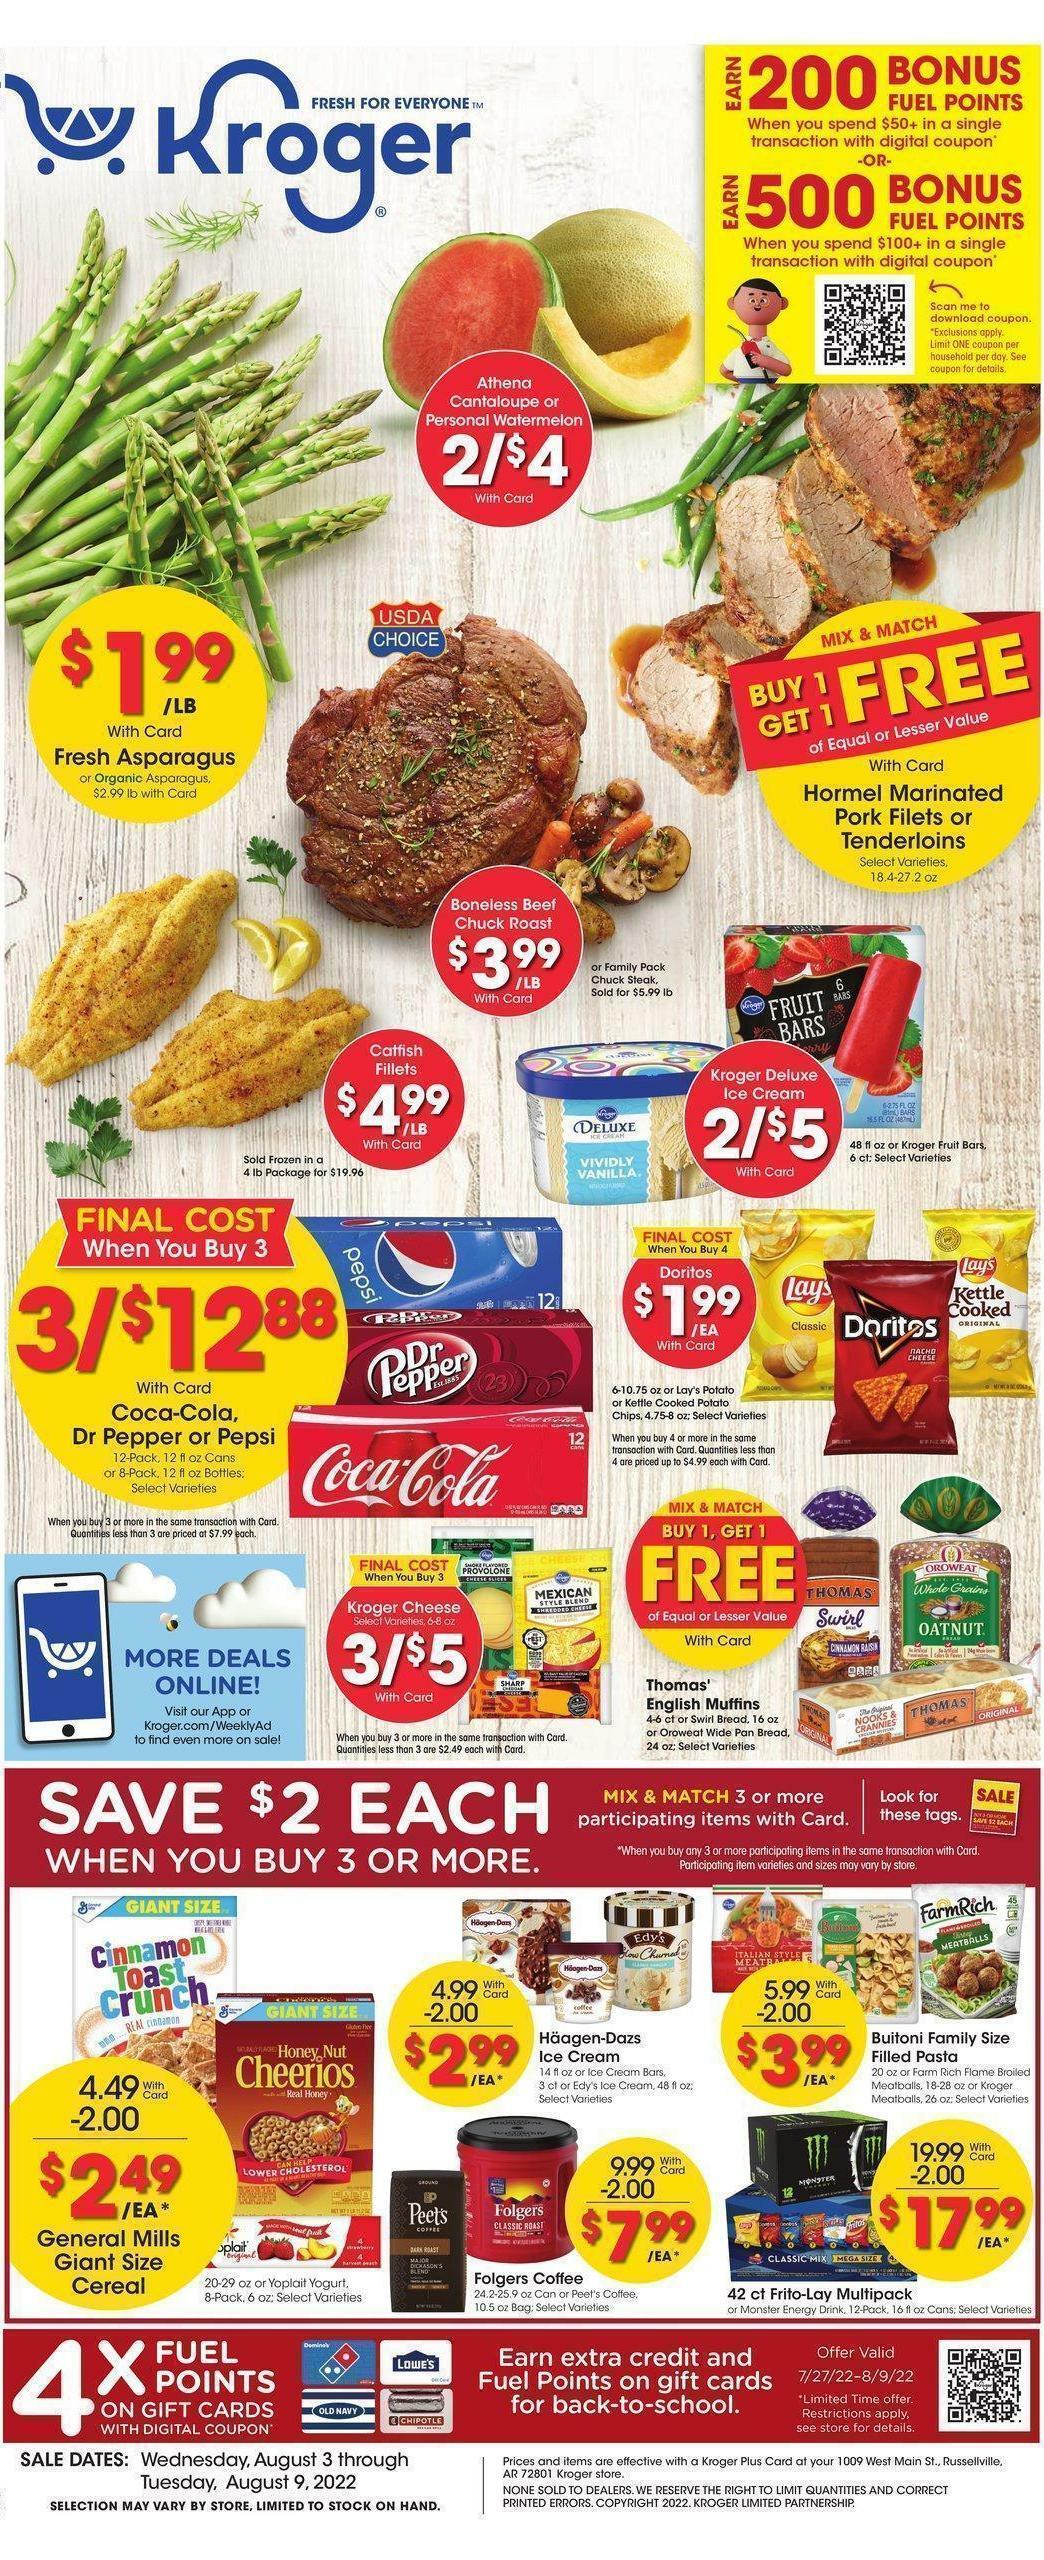 Kroger Weekly Ad from August 3